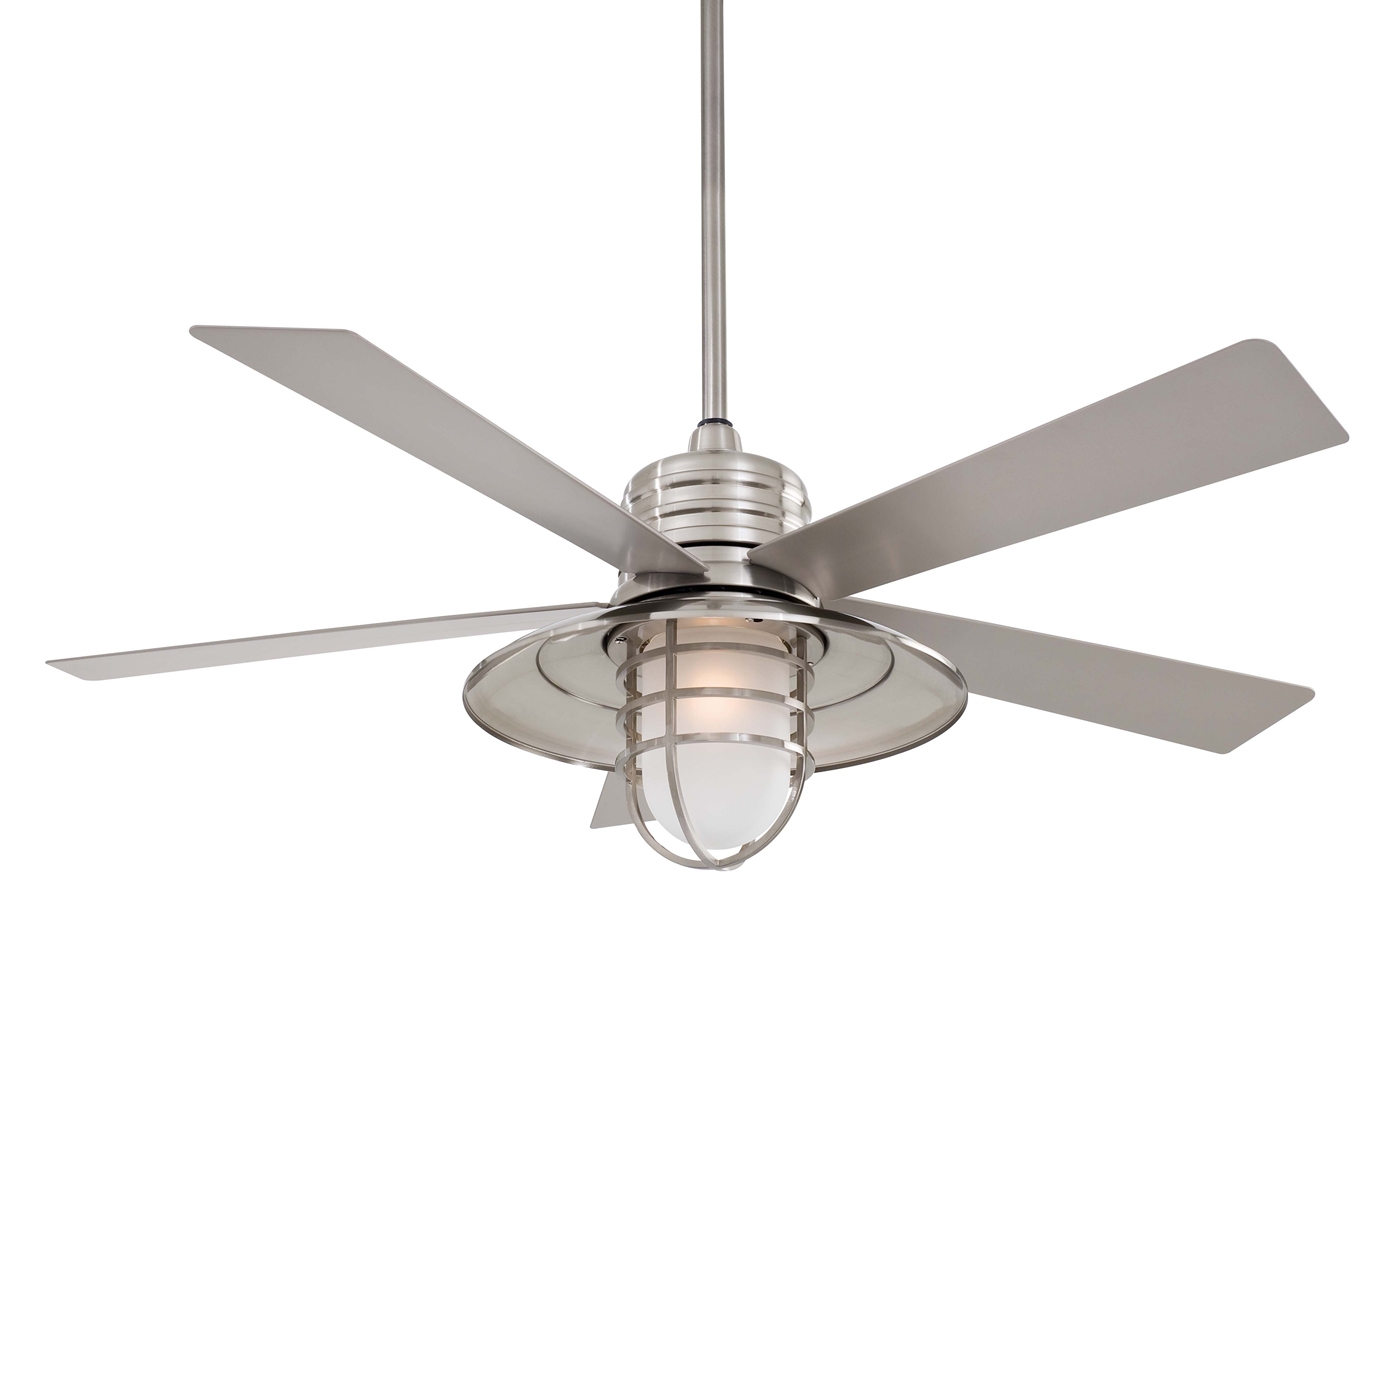 Industrial Outdoor Ceiling Fan With Light10 adventages of small outdoor ceiling fans warisan lighting